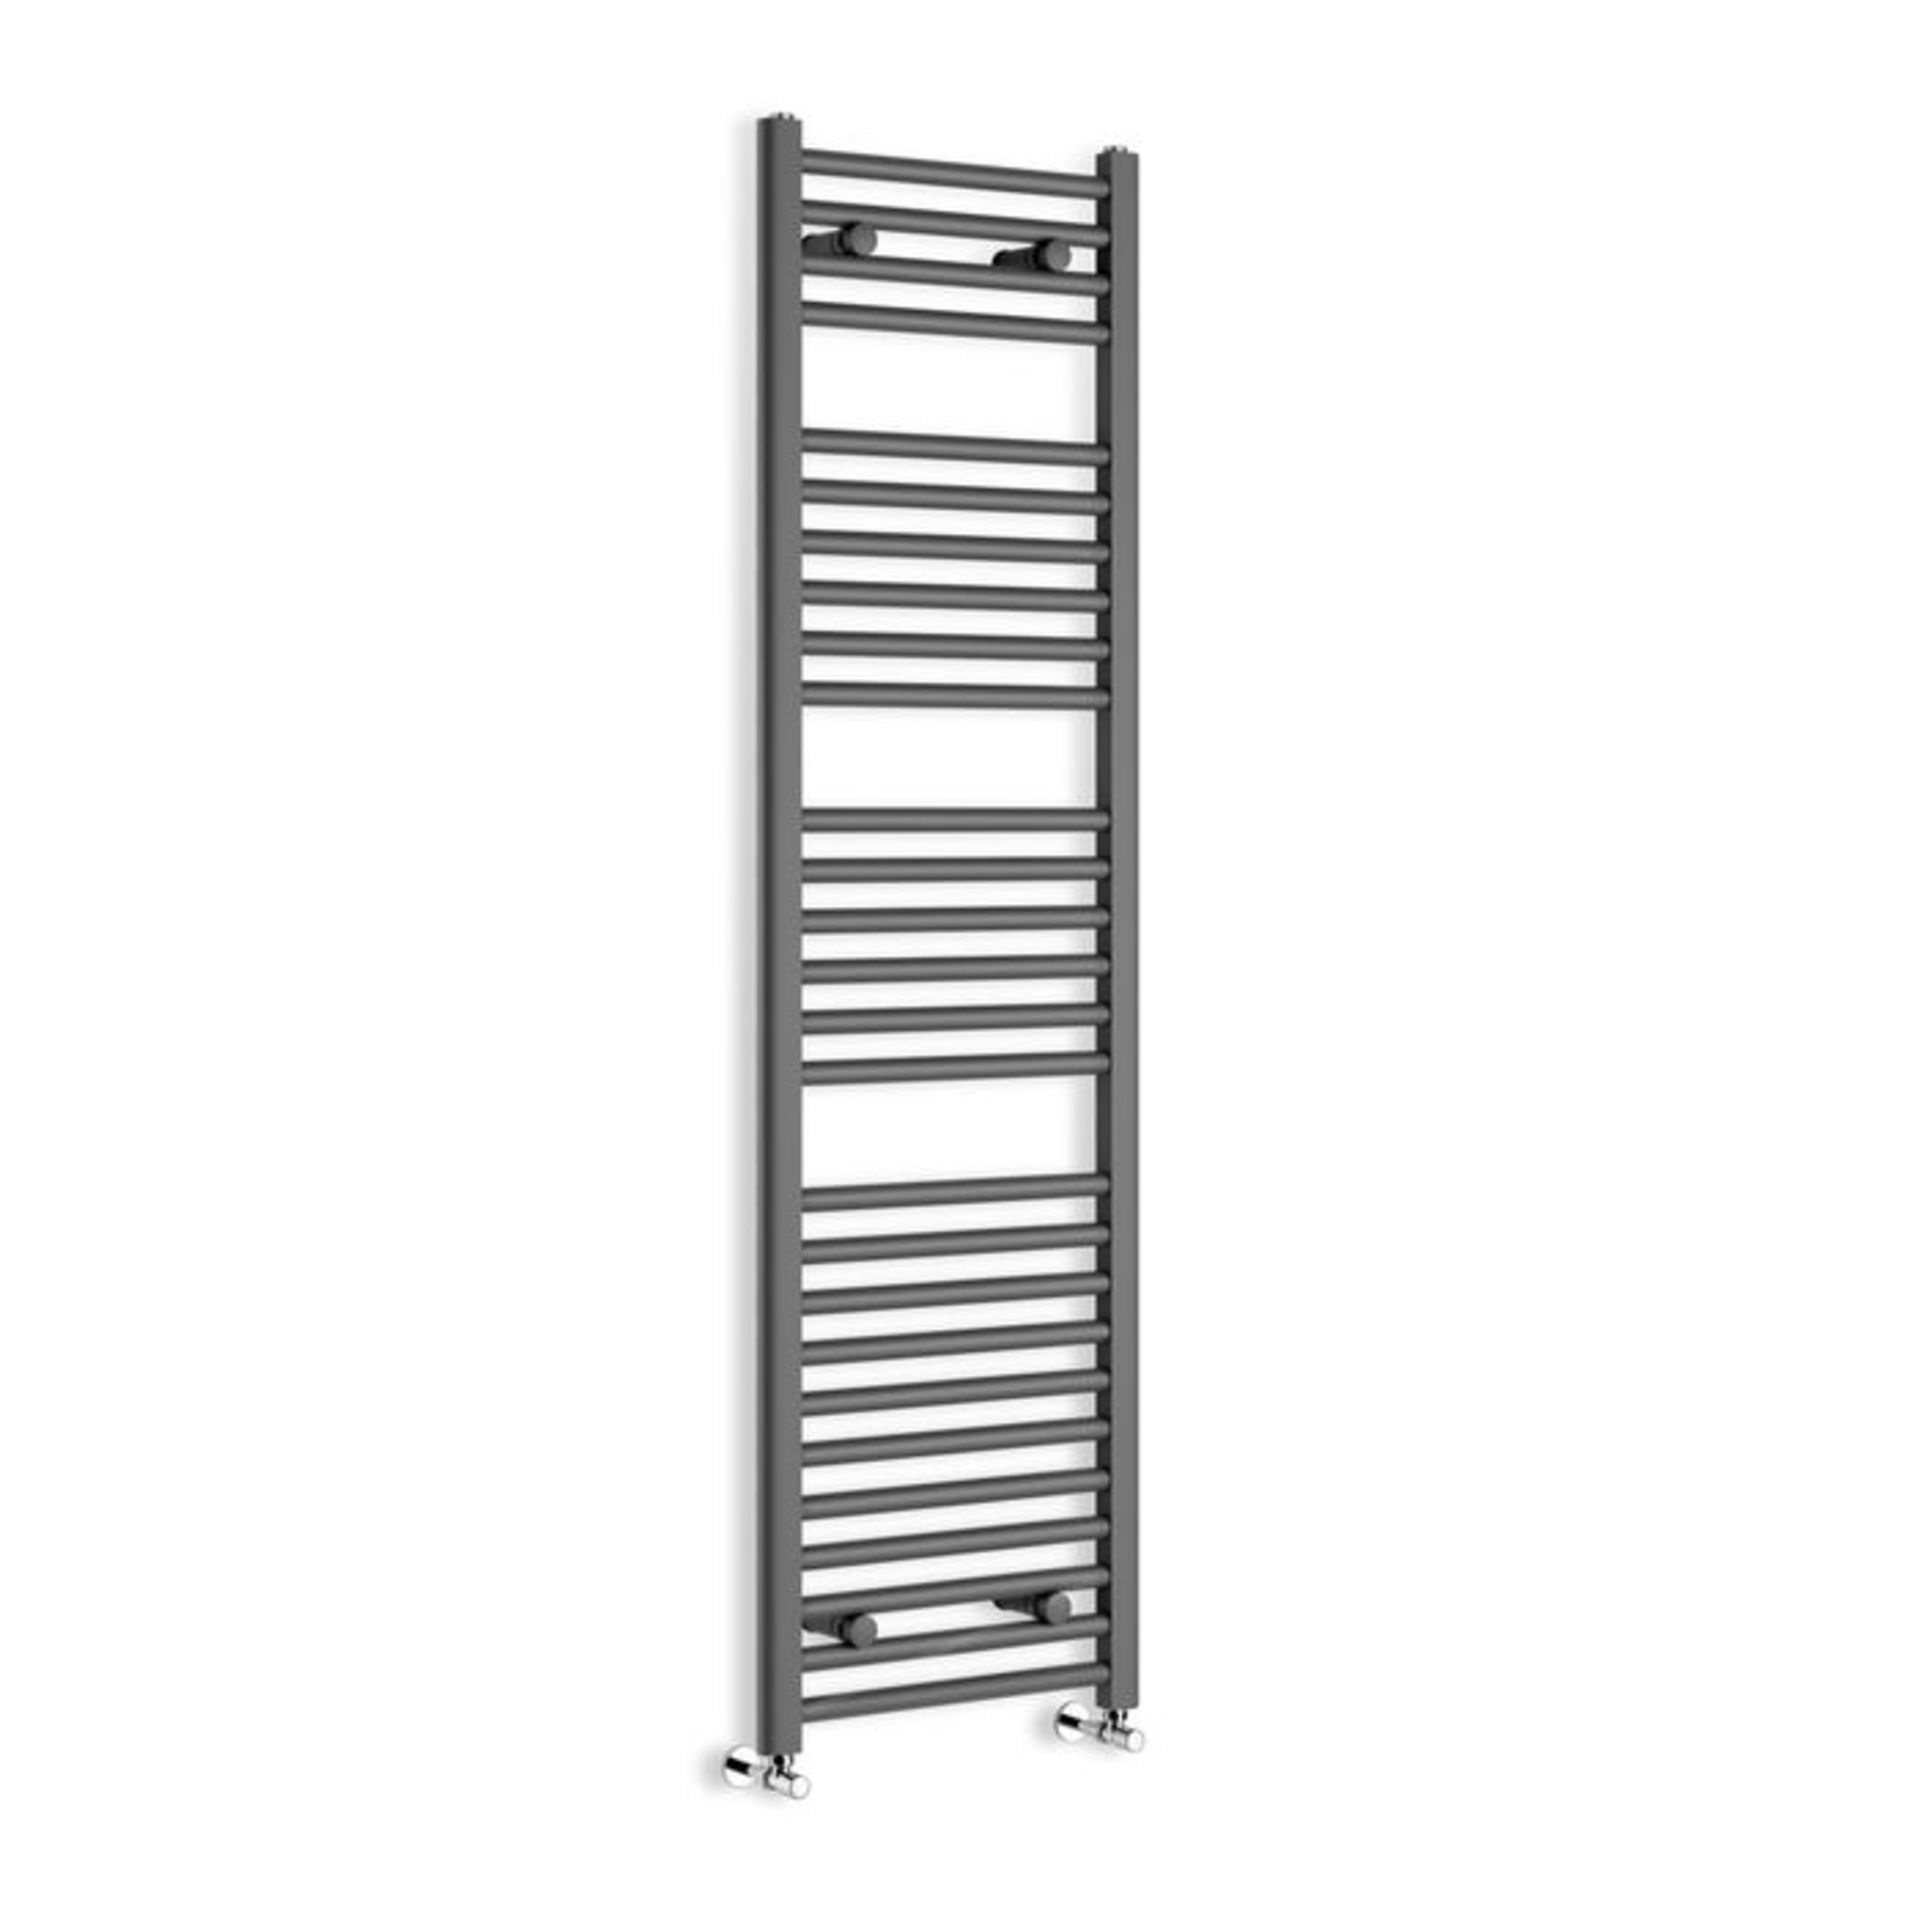 (LP21) 1600x450mm - 25mm Tubes - Anthracite Heated Straight Rail Ladder Towel Radiator. RRP £262.99. - Image 3 of 3